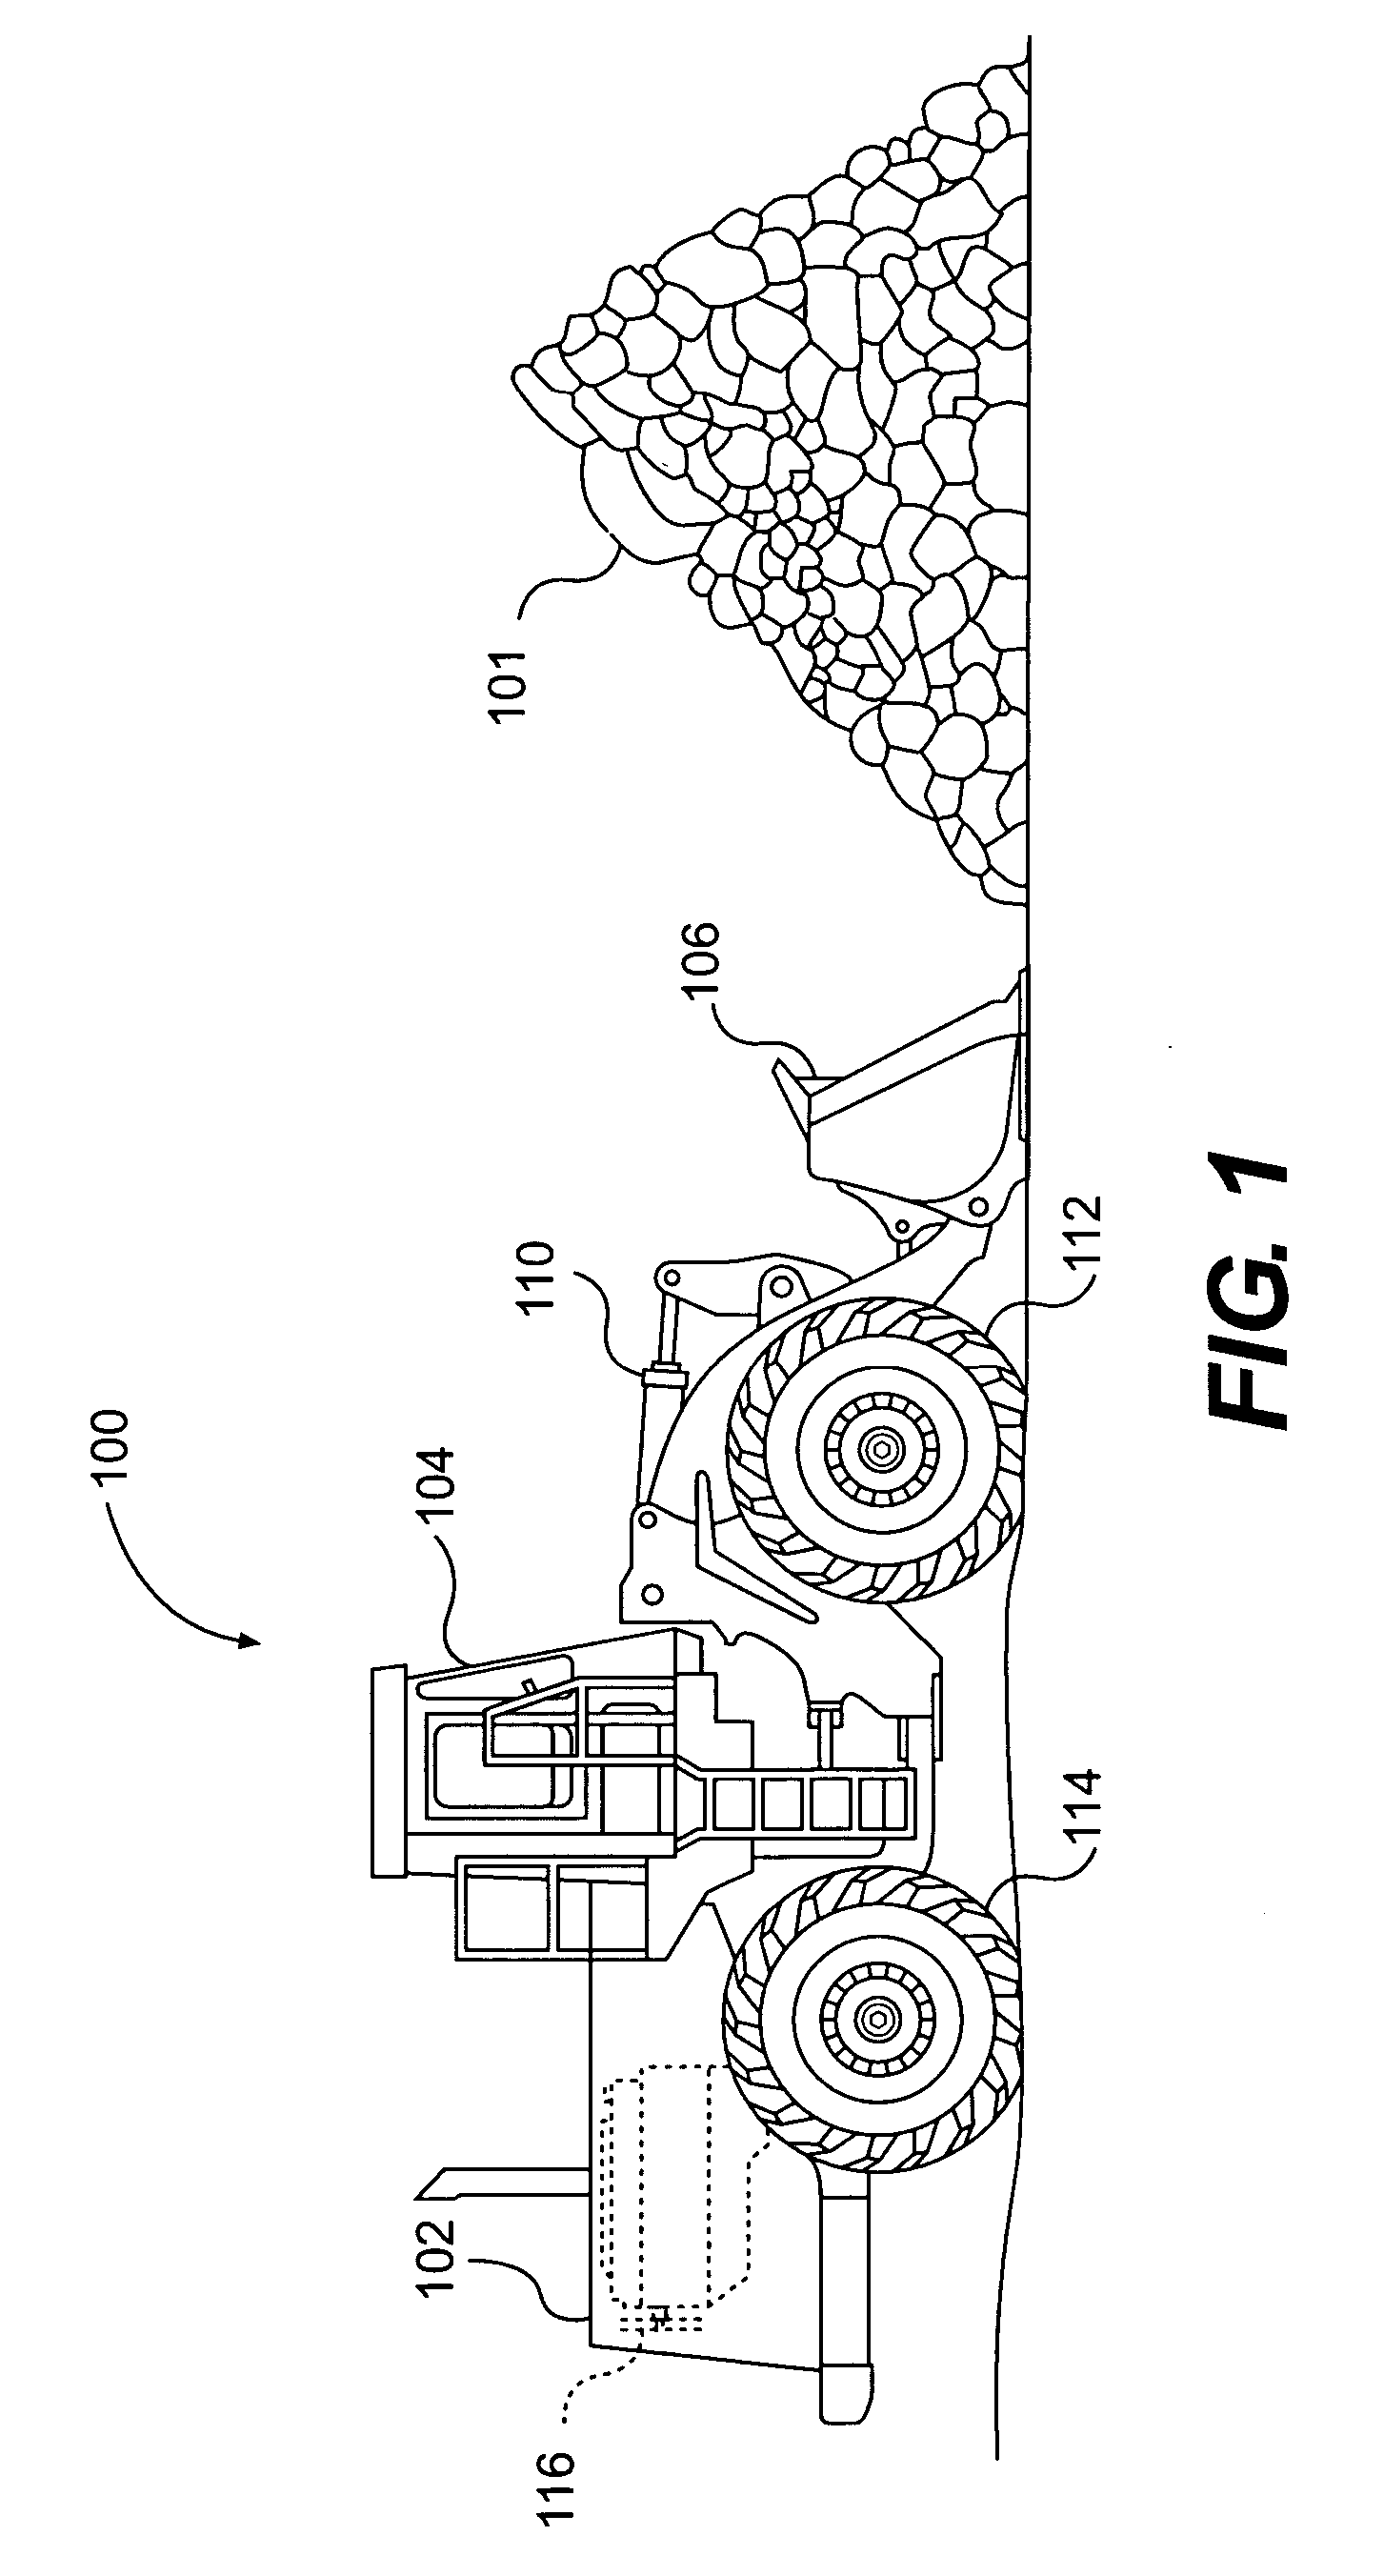 Automatic digging and loading system for a work machine